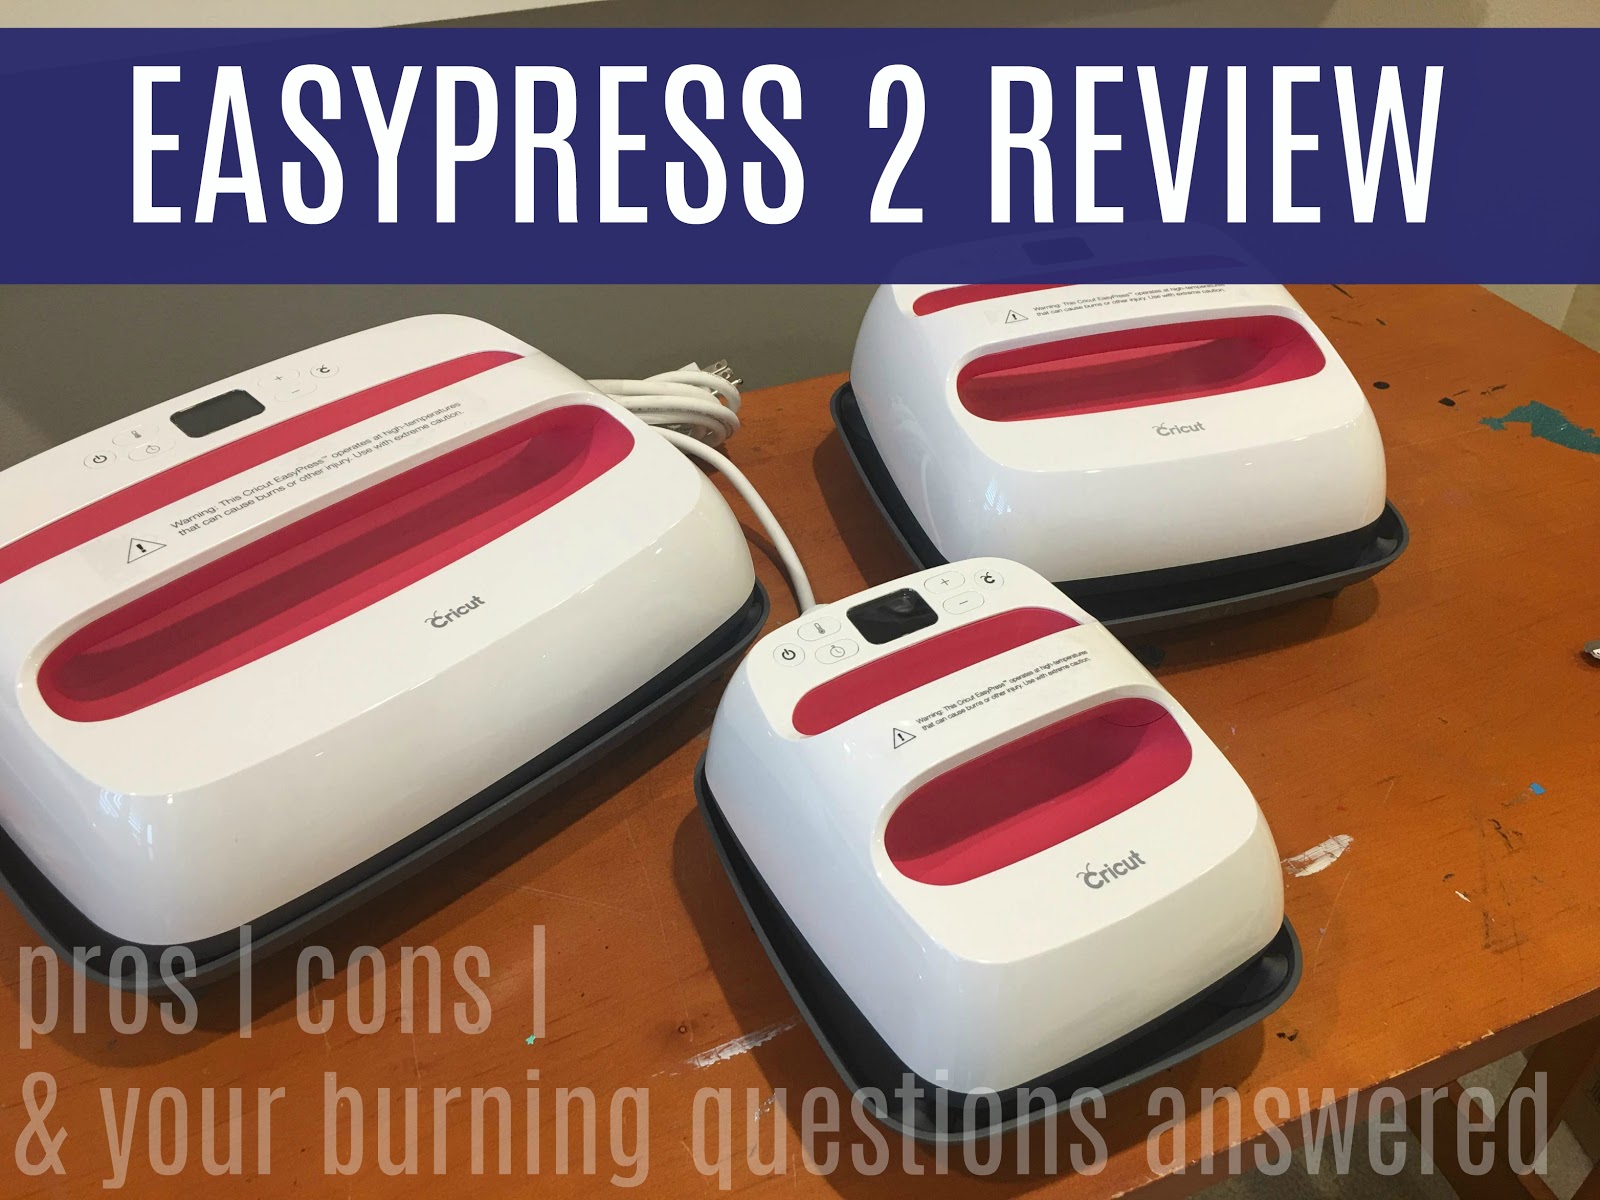 Cricut EasyPress 2 Review: All Your Burning Questions Answered